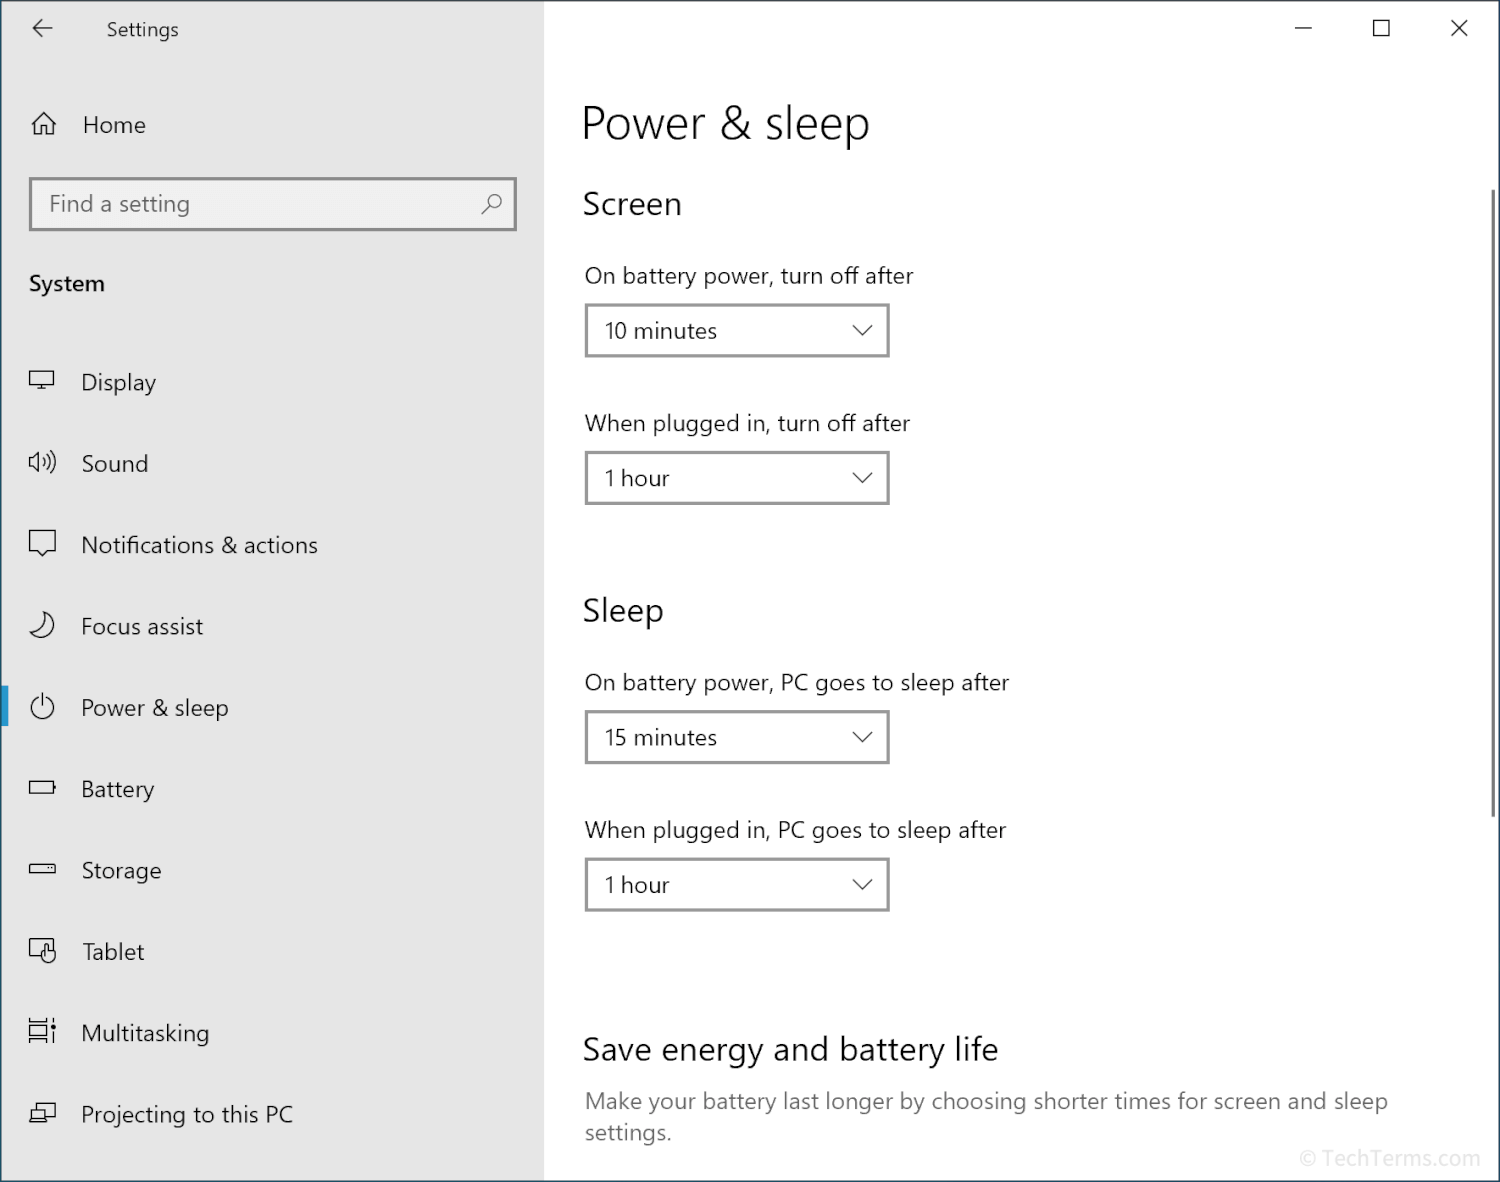 The Power and Sleep settings in Windows 10 let you customize how long your computer waits before going to sleep